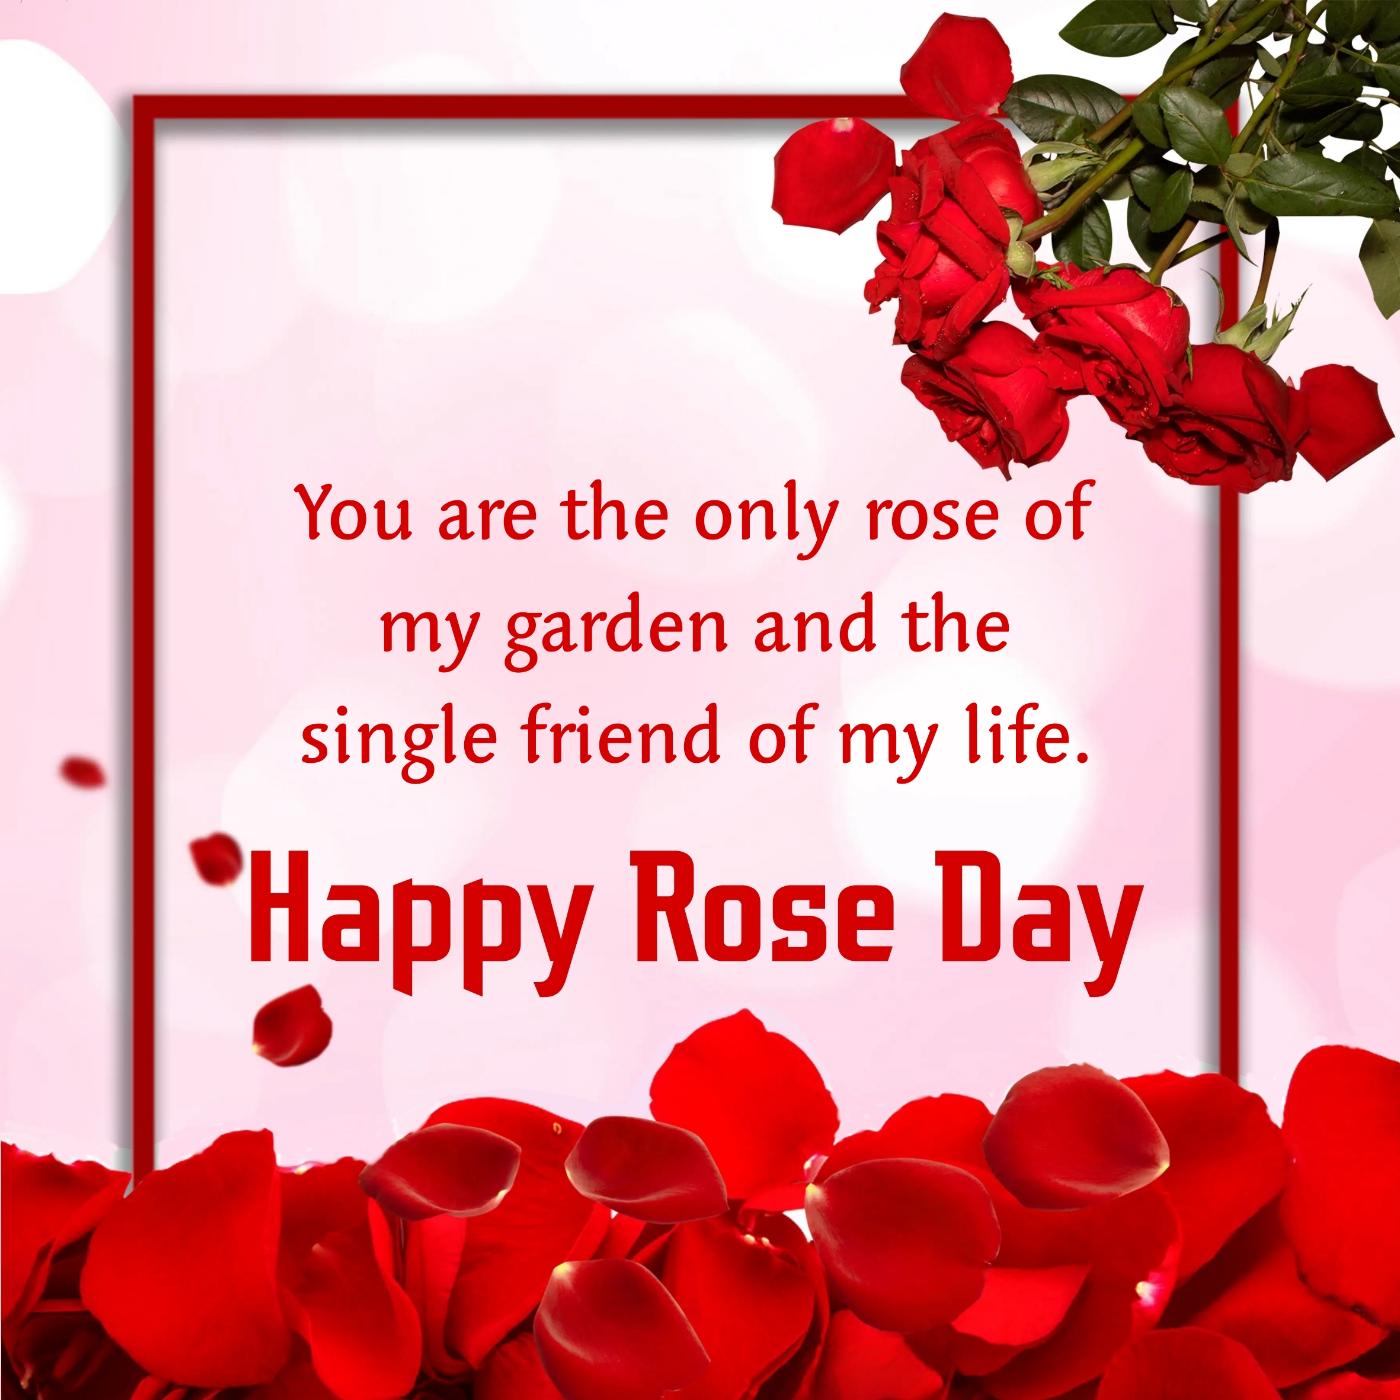 You are the only rose of my garden and the single friend